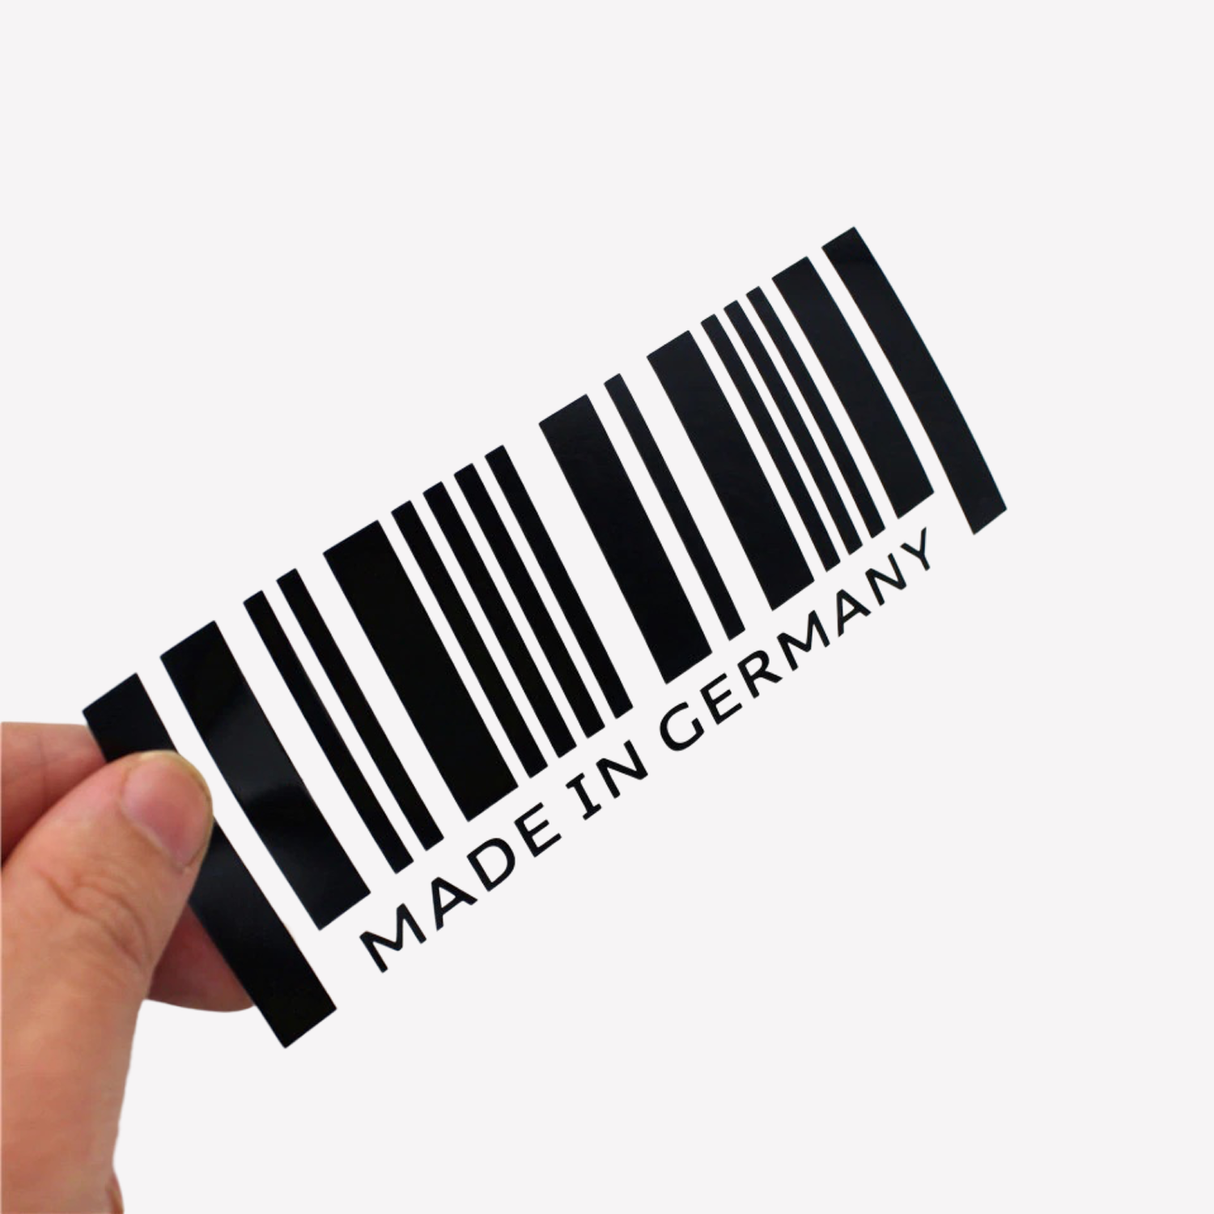 Made in Germany Barcode Sticker Decal Euro Gift Audi VW BMW Mercedes